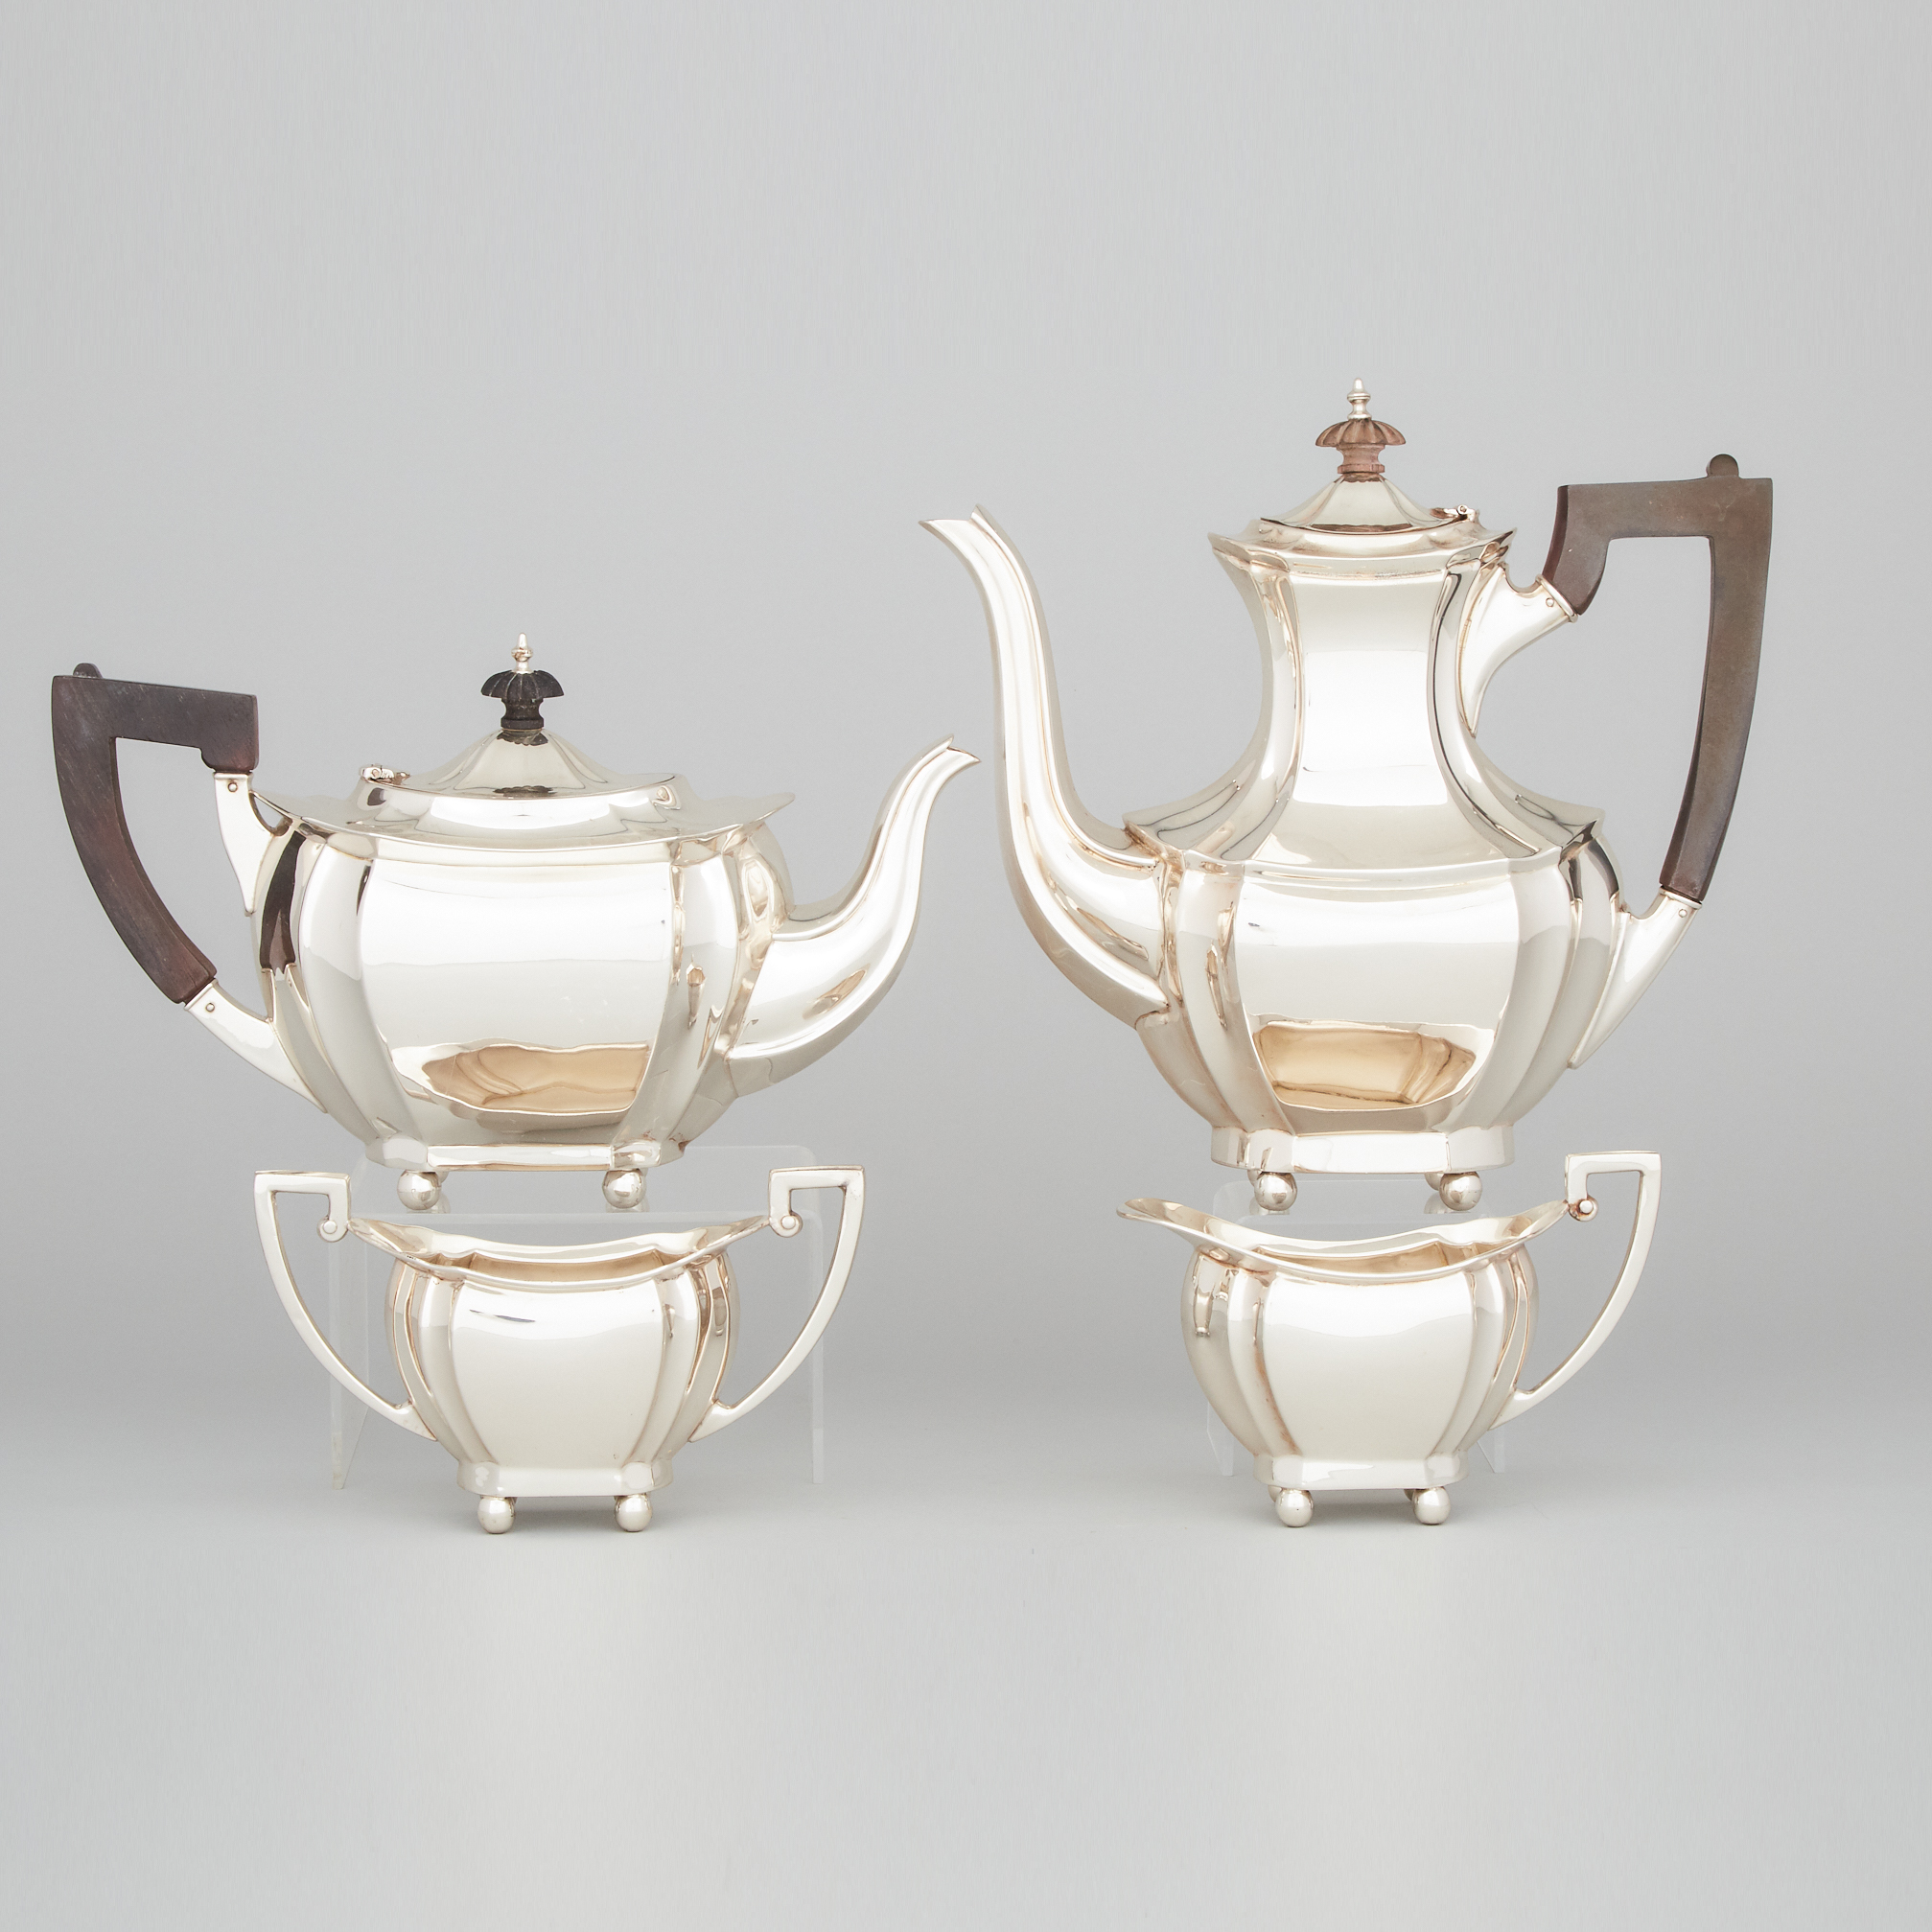 Canadian Silver Tea and Coffee Service, Roden Brothers, Toronto, Ont., 20th century